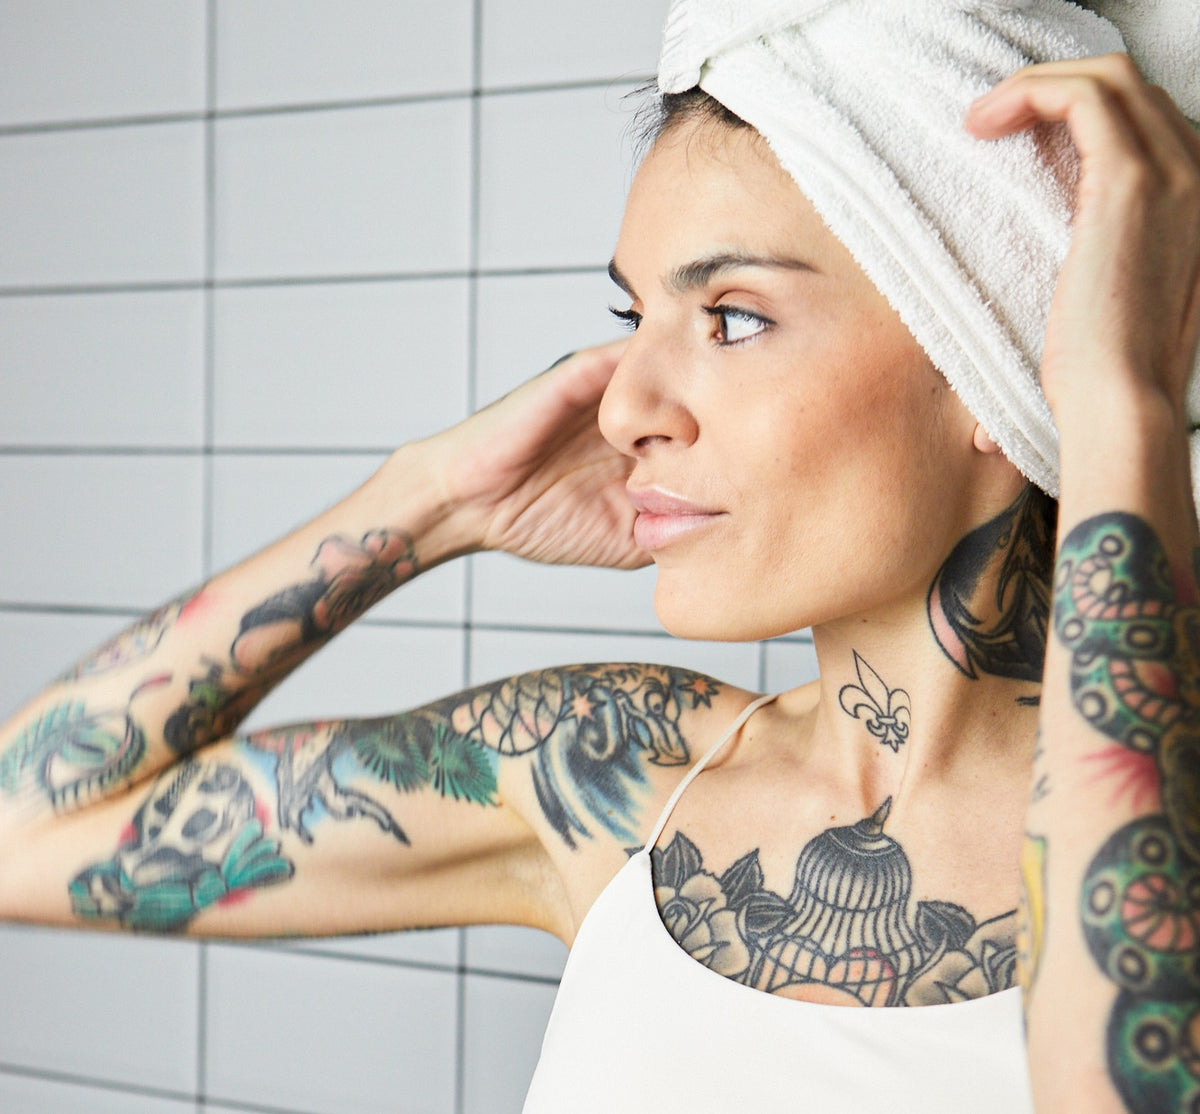 Showering After a Tattoo: What You Need to Know